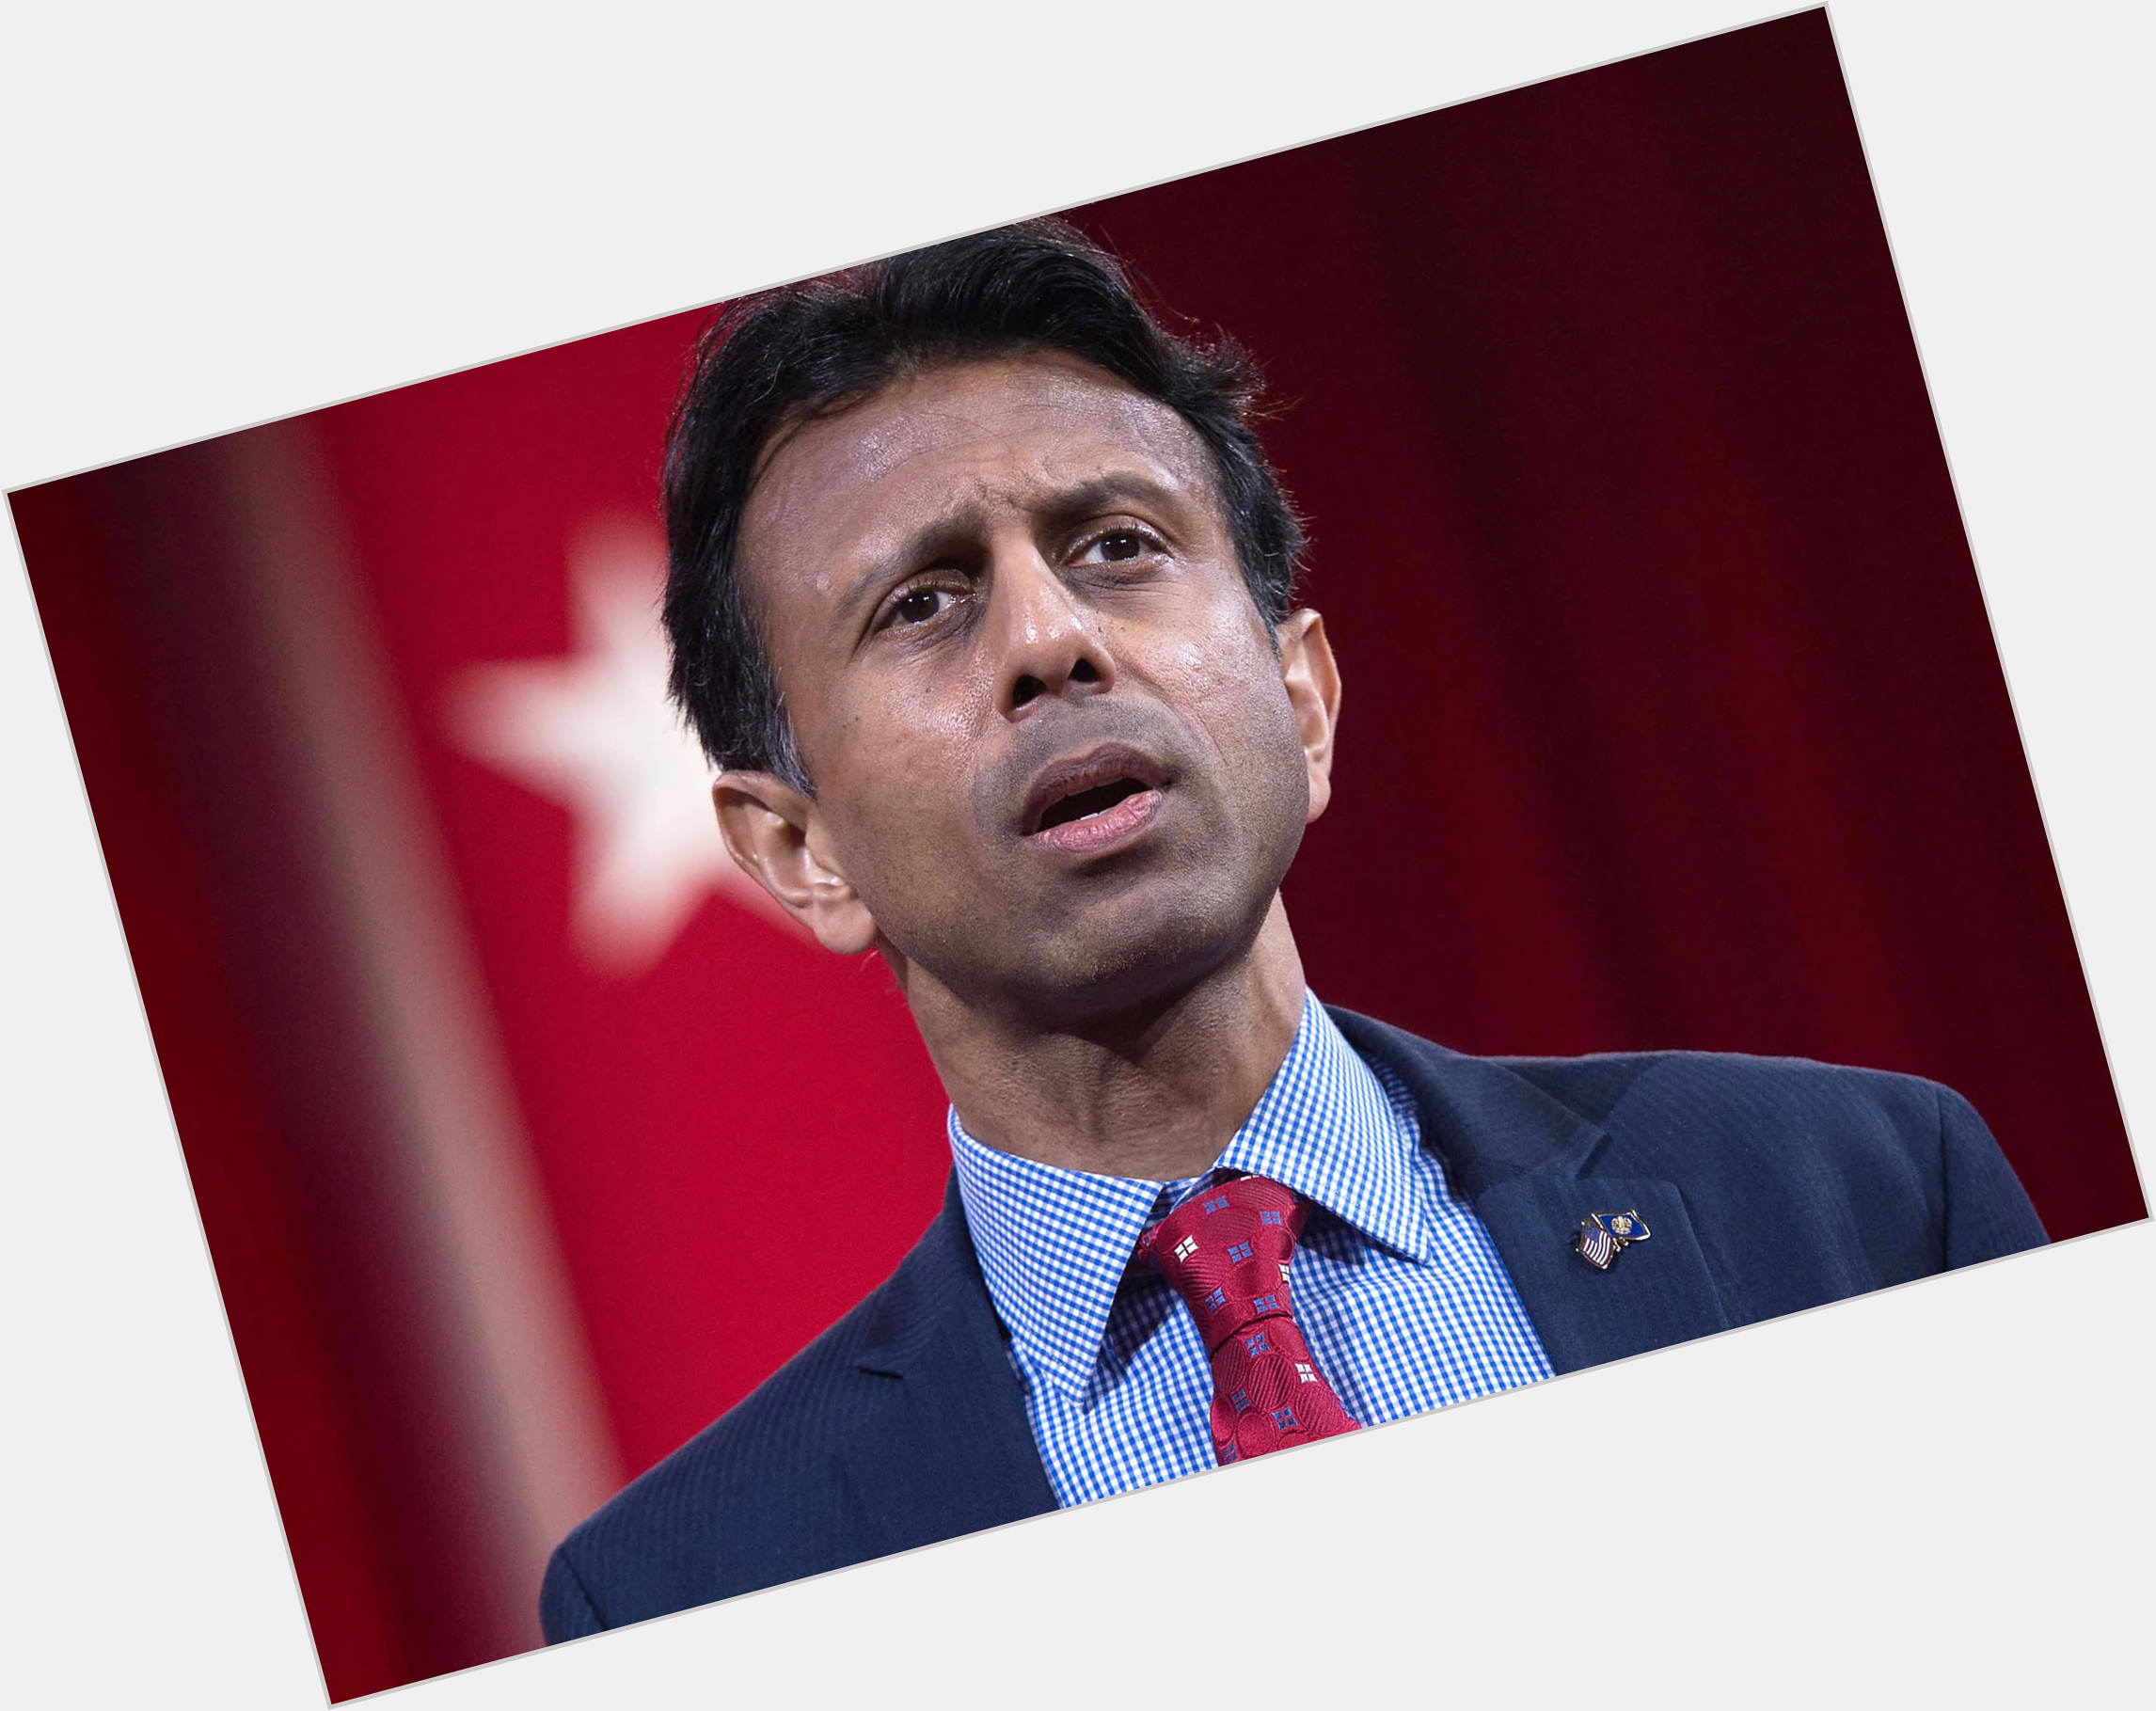 <a href="/hot-men/bobby-jindal/is-he-republican-or-democrat-good-governor-black">Bobby Jindal</a> Slim body,  black hair & hairstyles